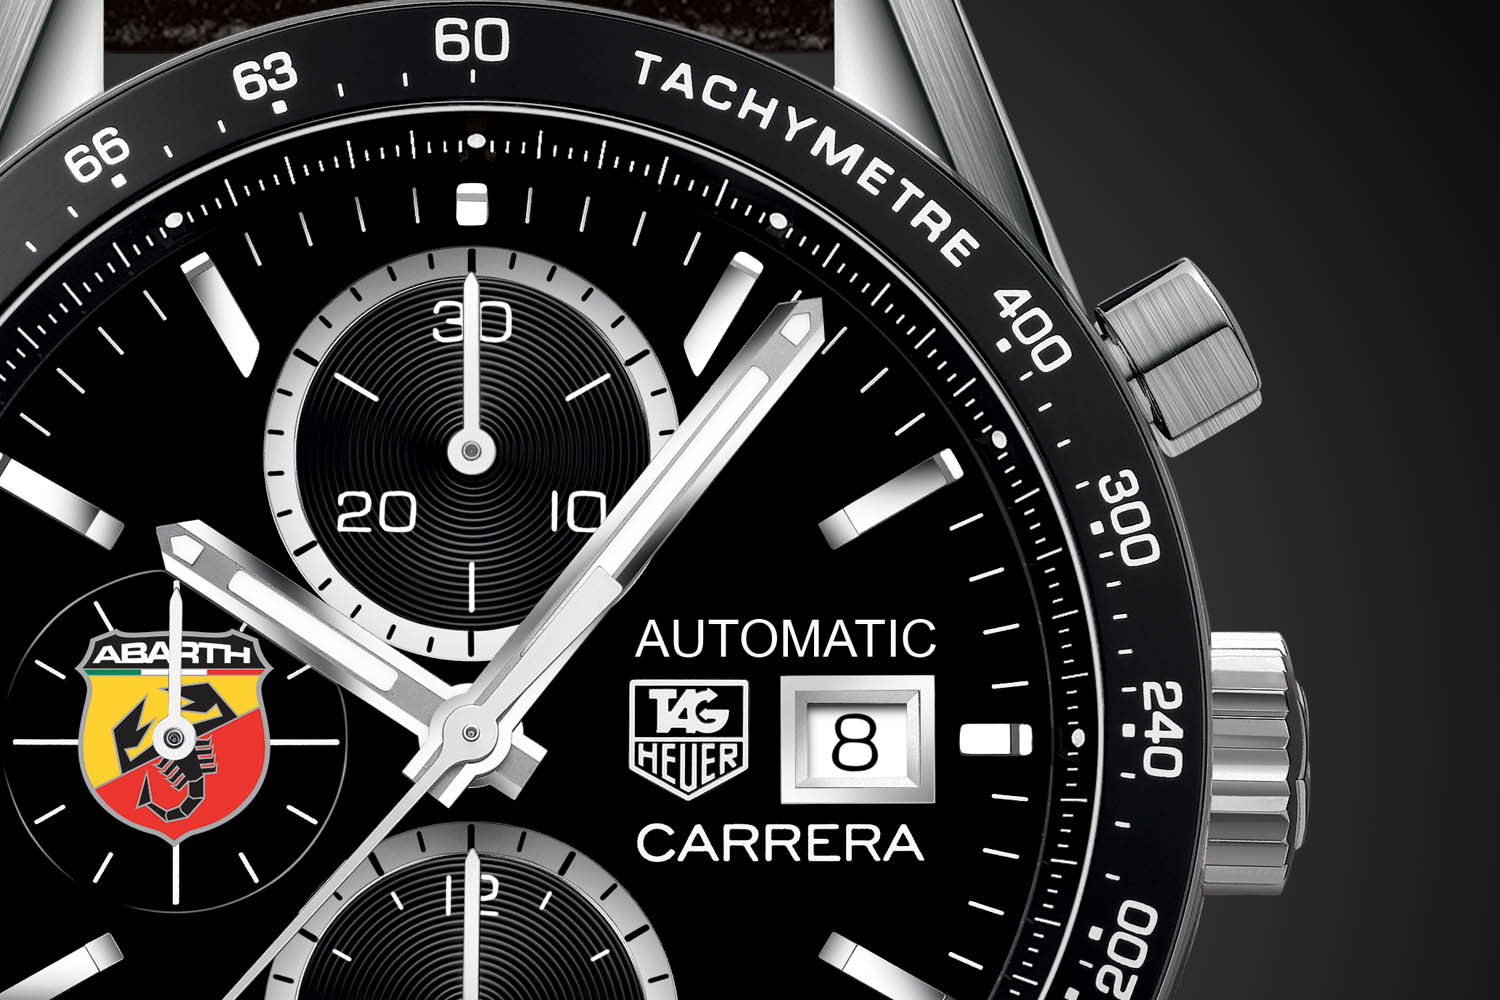 TAG Heuer Carrera Abarth 595 Competizione by TAG Heuer - 4